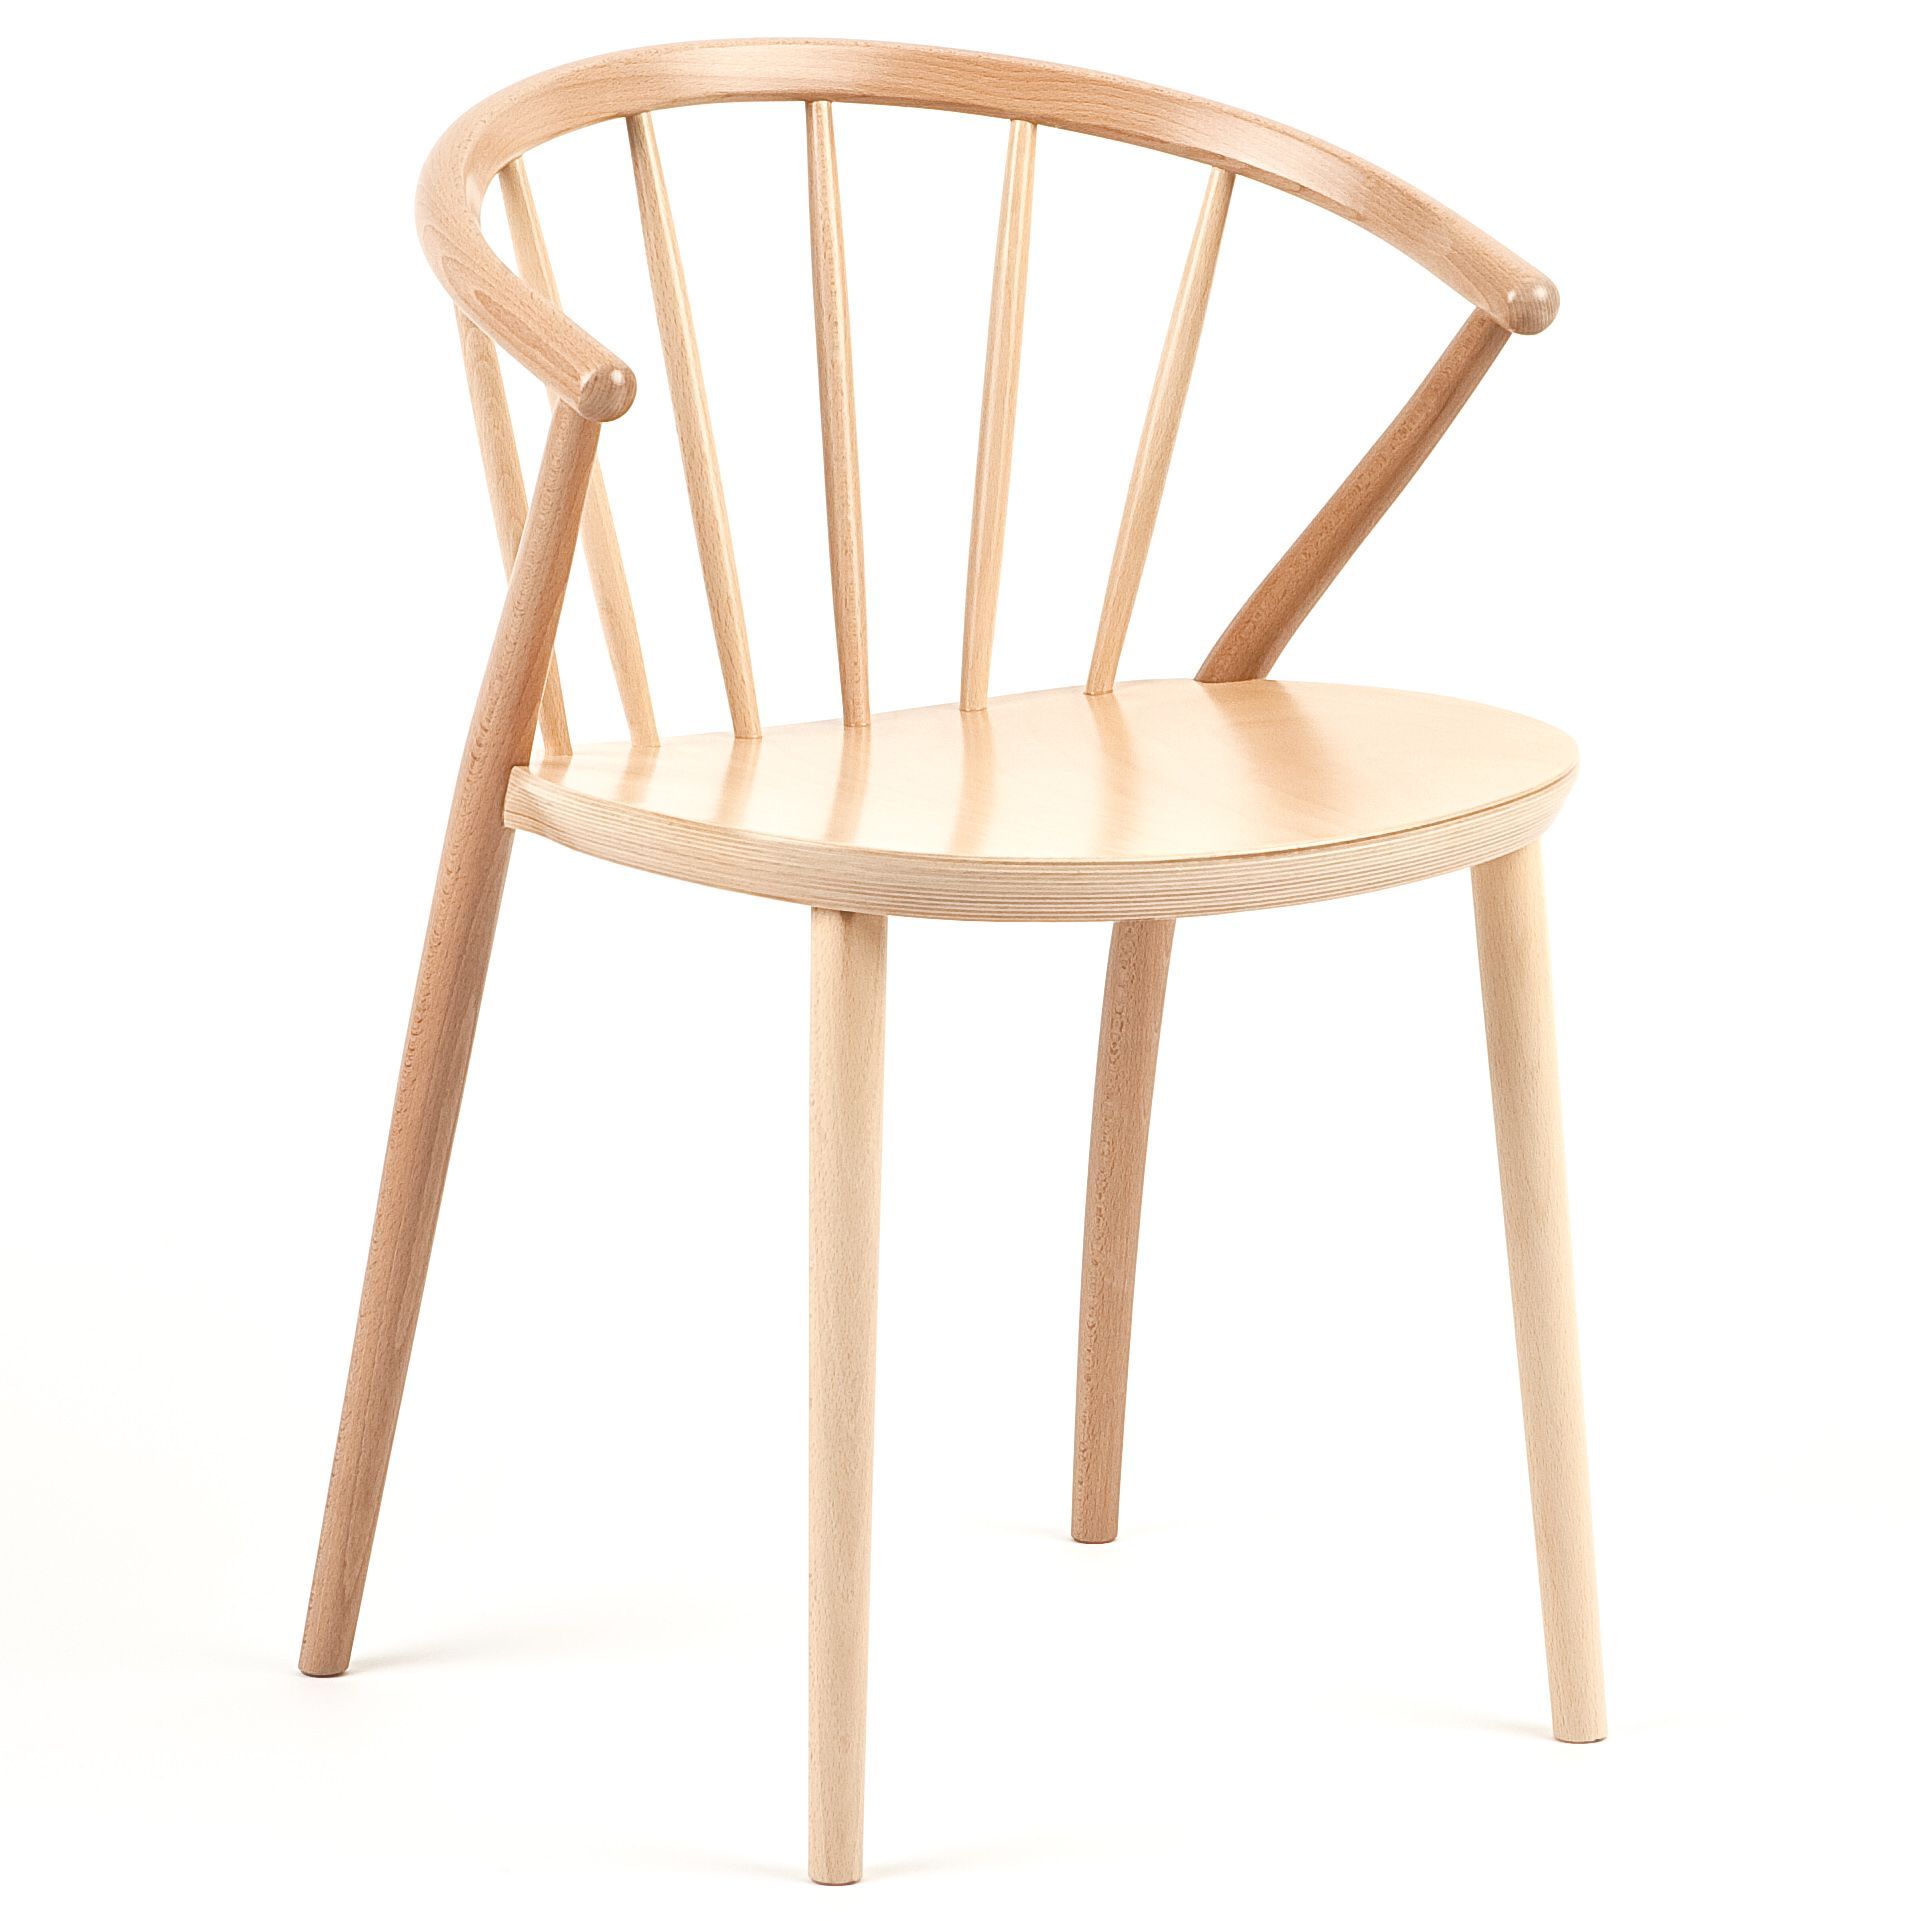 Chair B-9820 SUDOKU by Paged